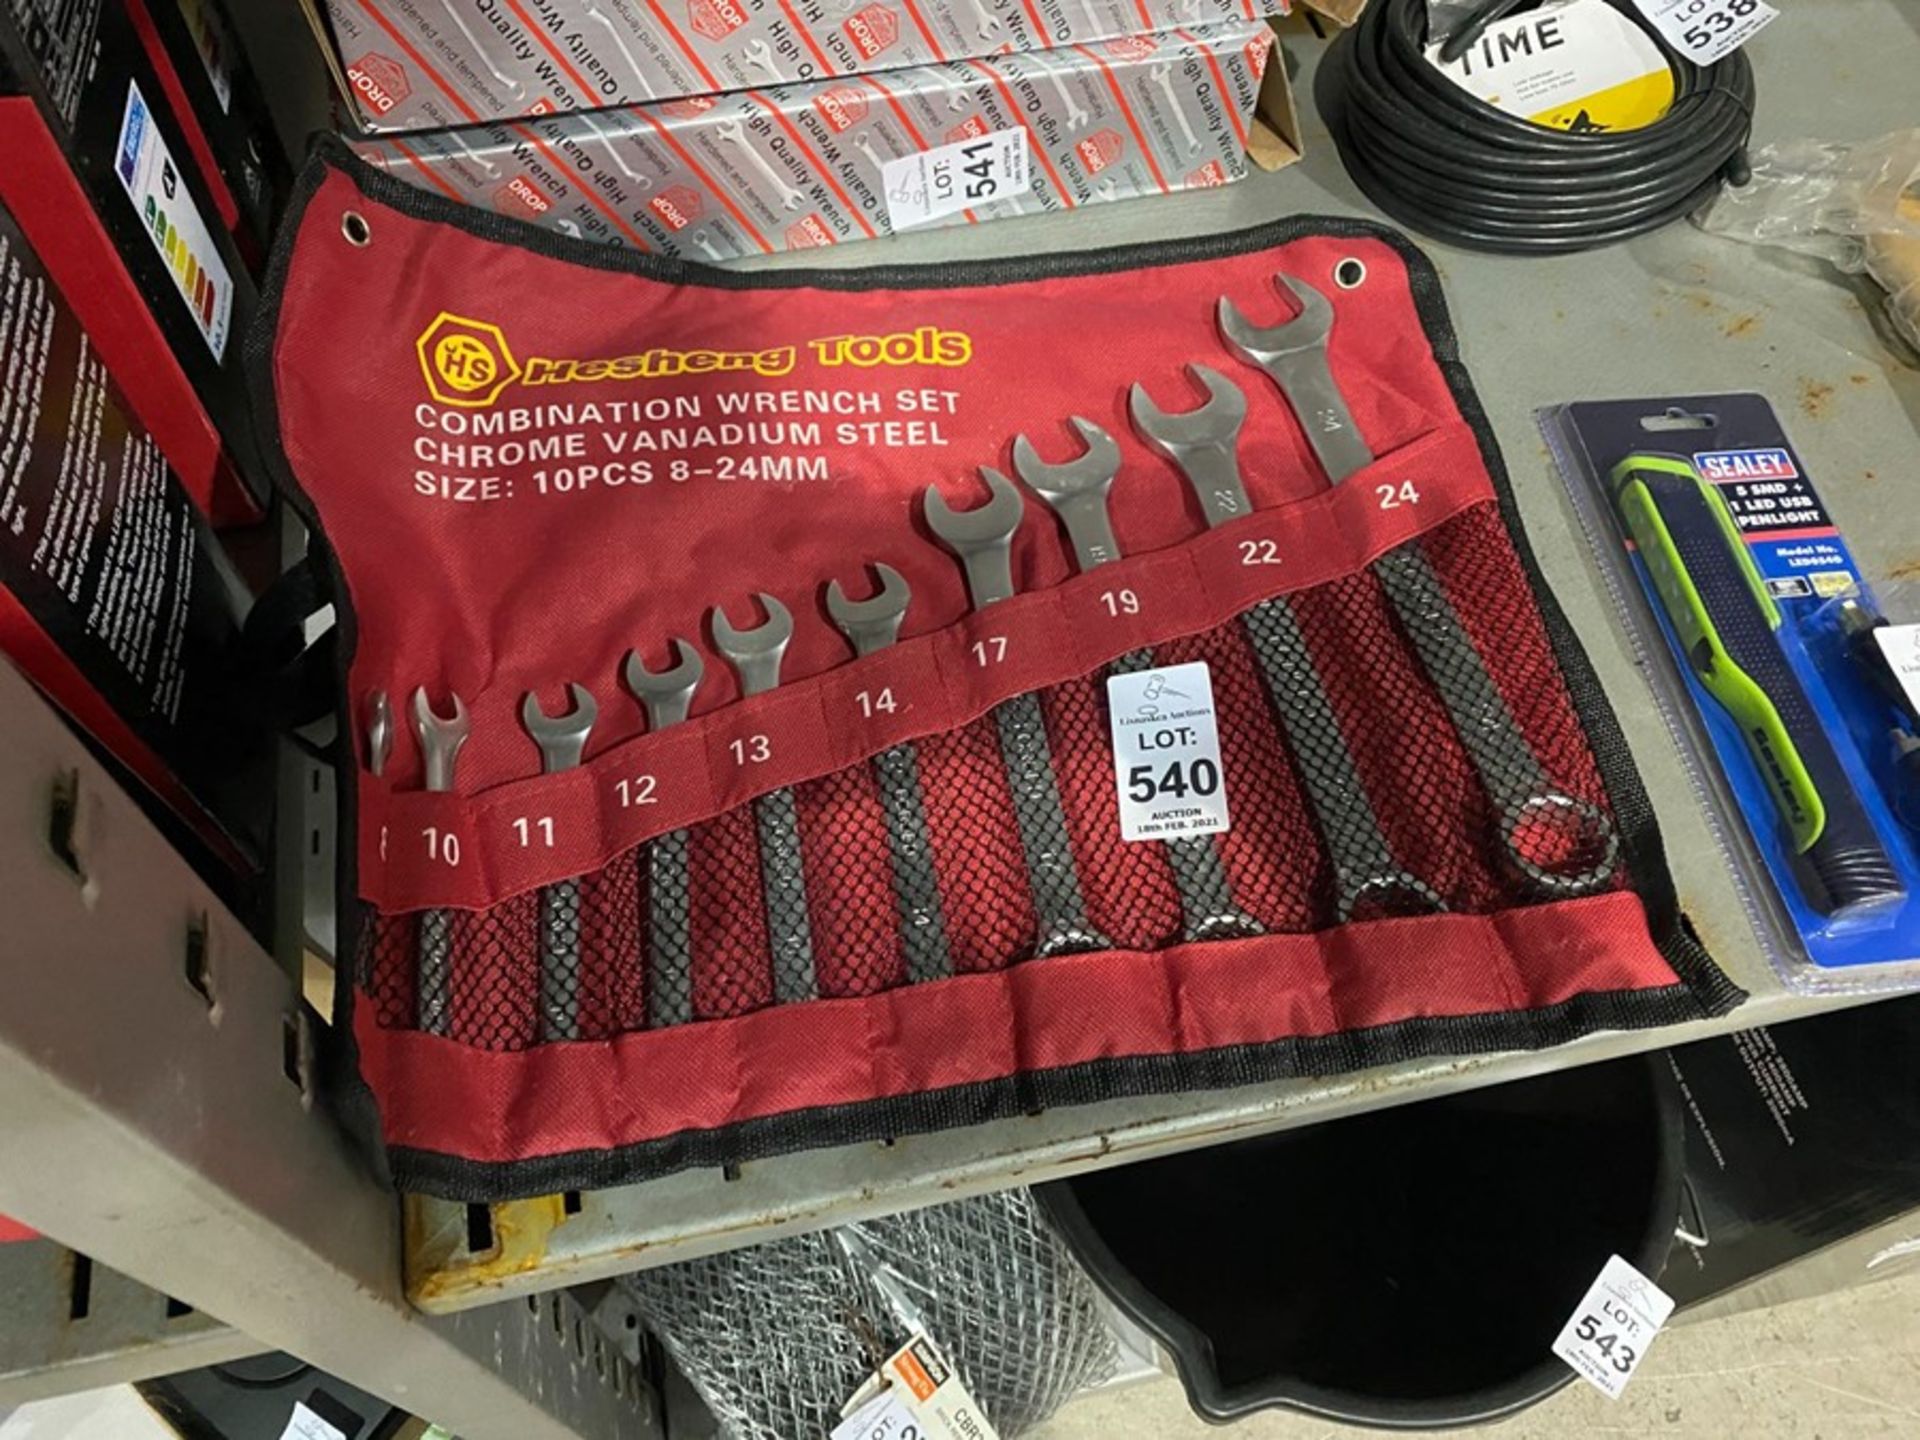 NEW 10PC COMBINATION WRENCH SET